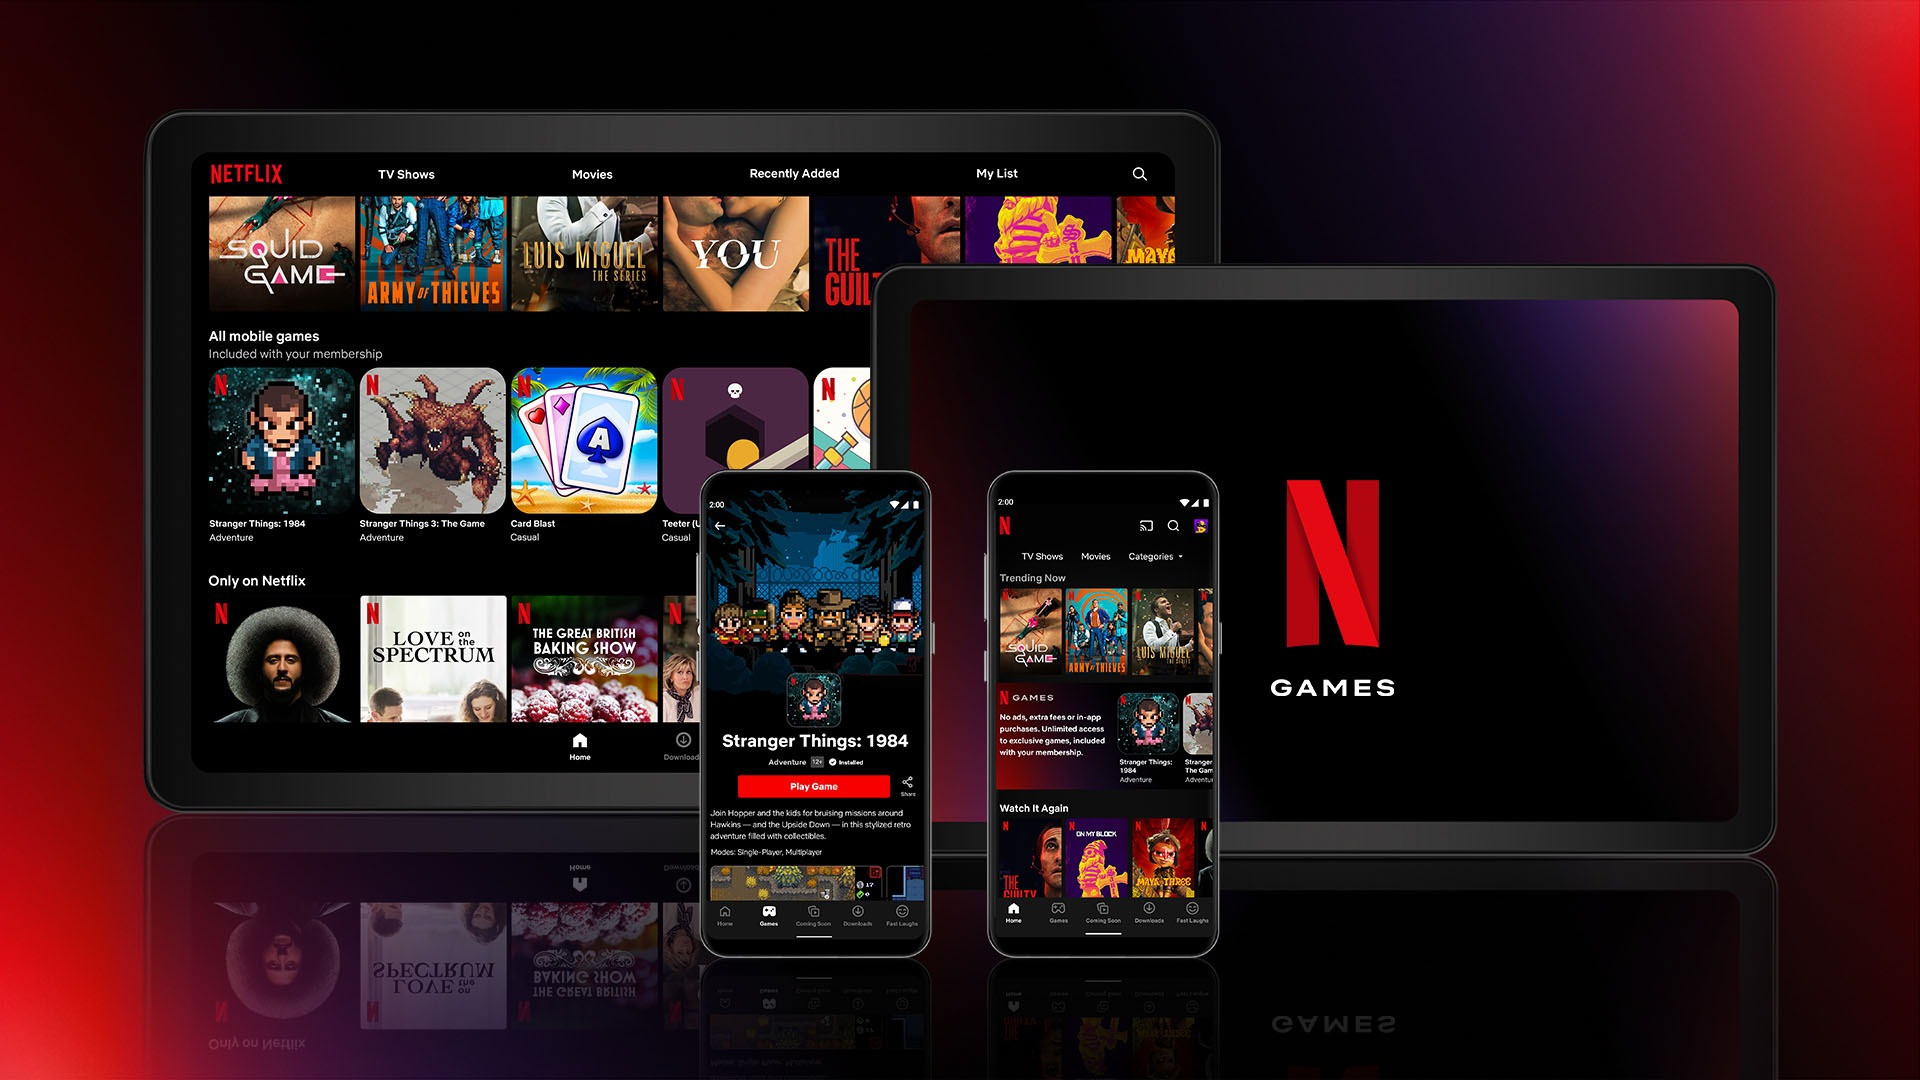 Netflix app is hiding some great games